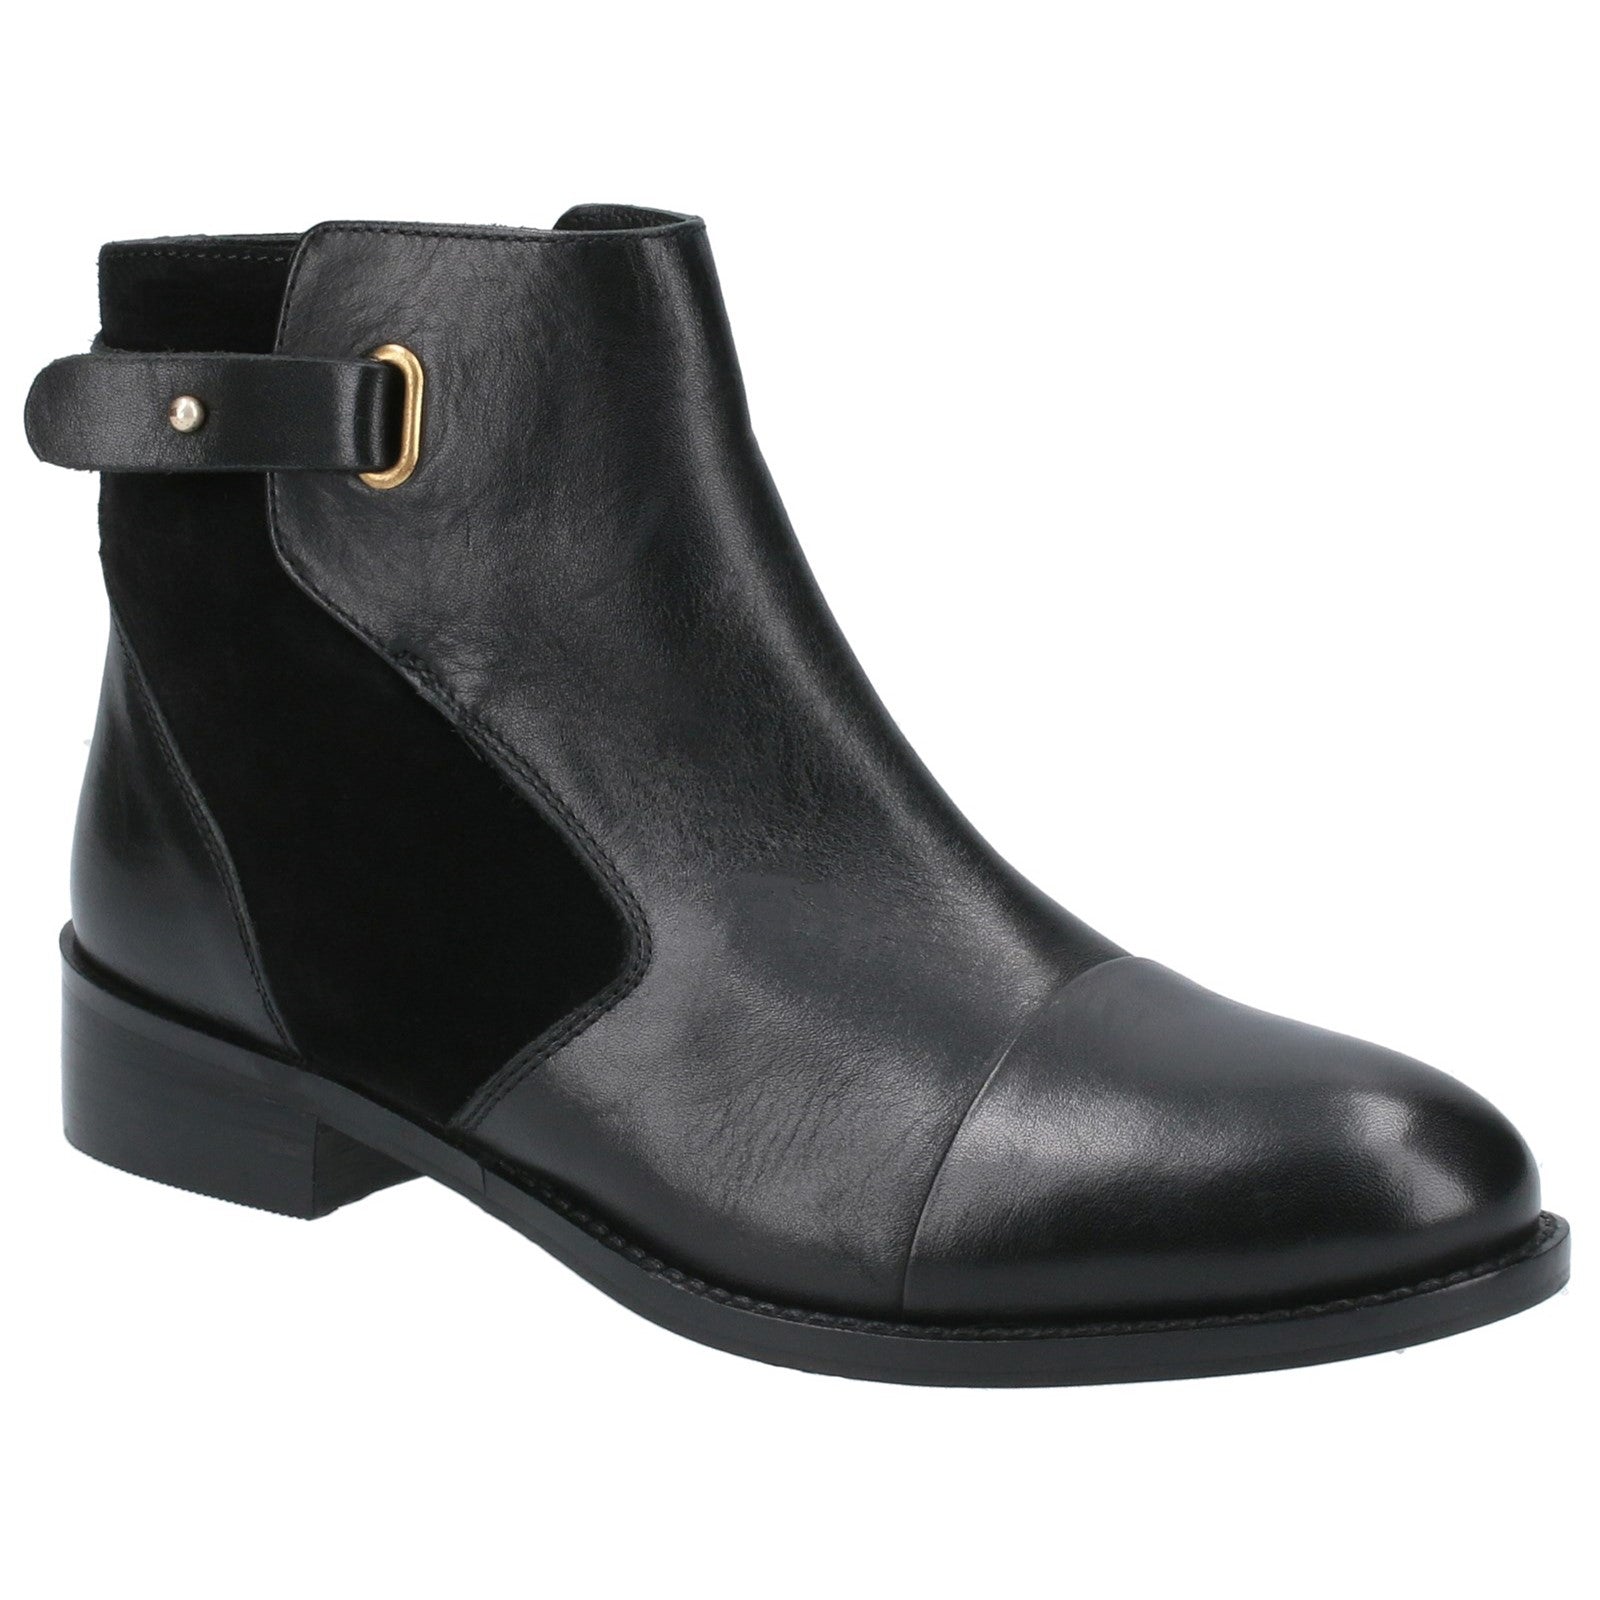 Ladies Ankle Boots Black Hush Puppies Hollie Zip Up Ankle Boot